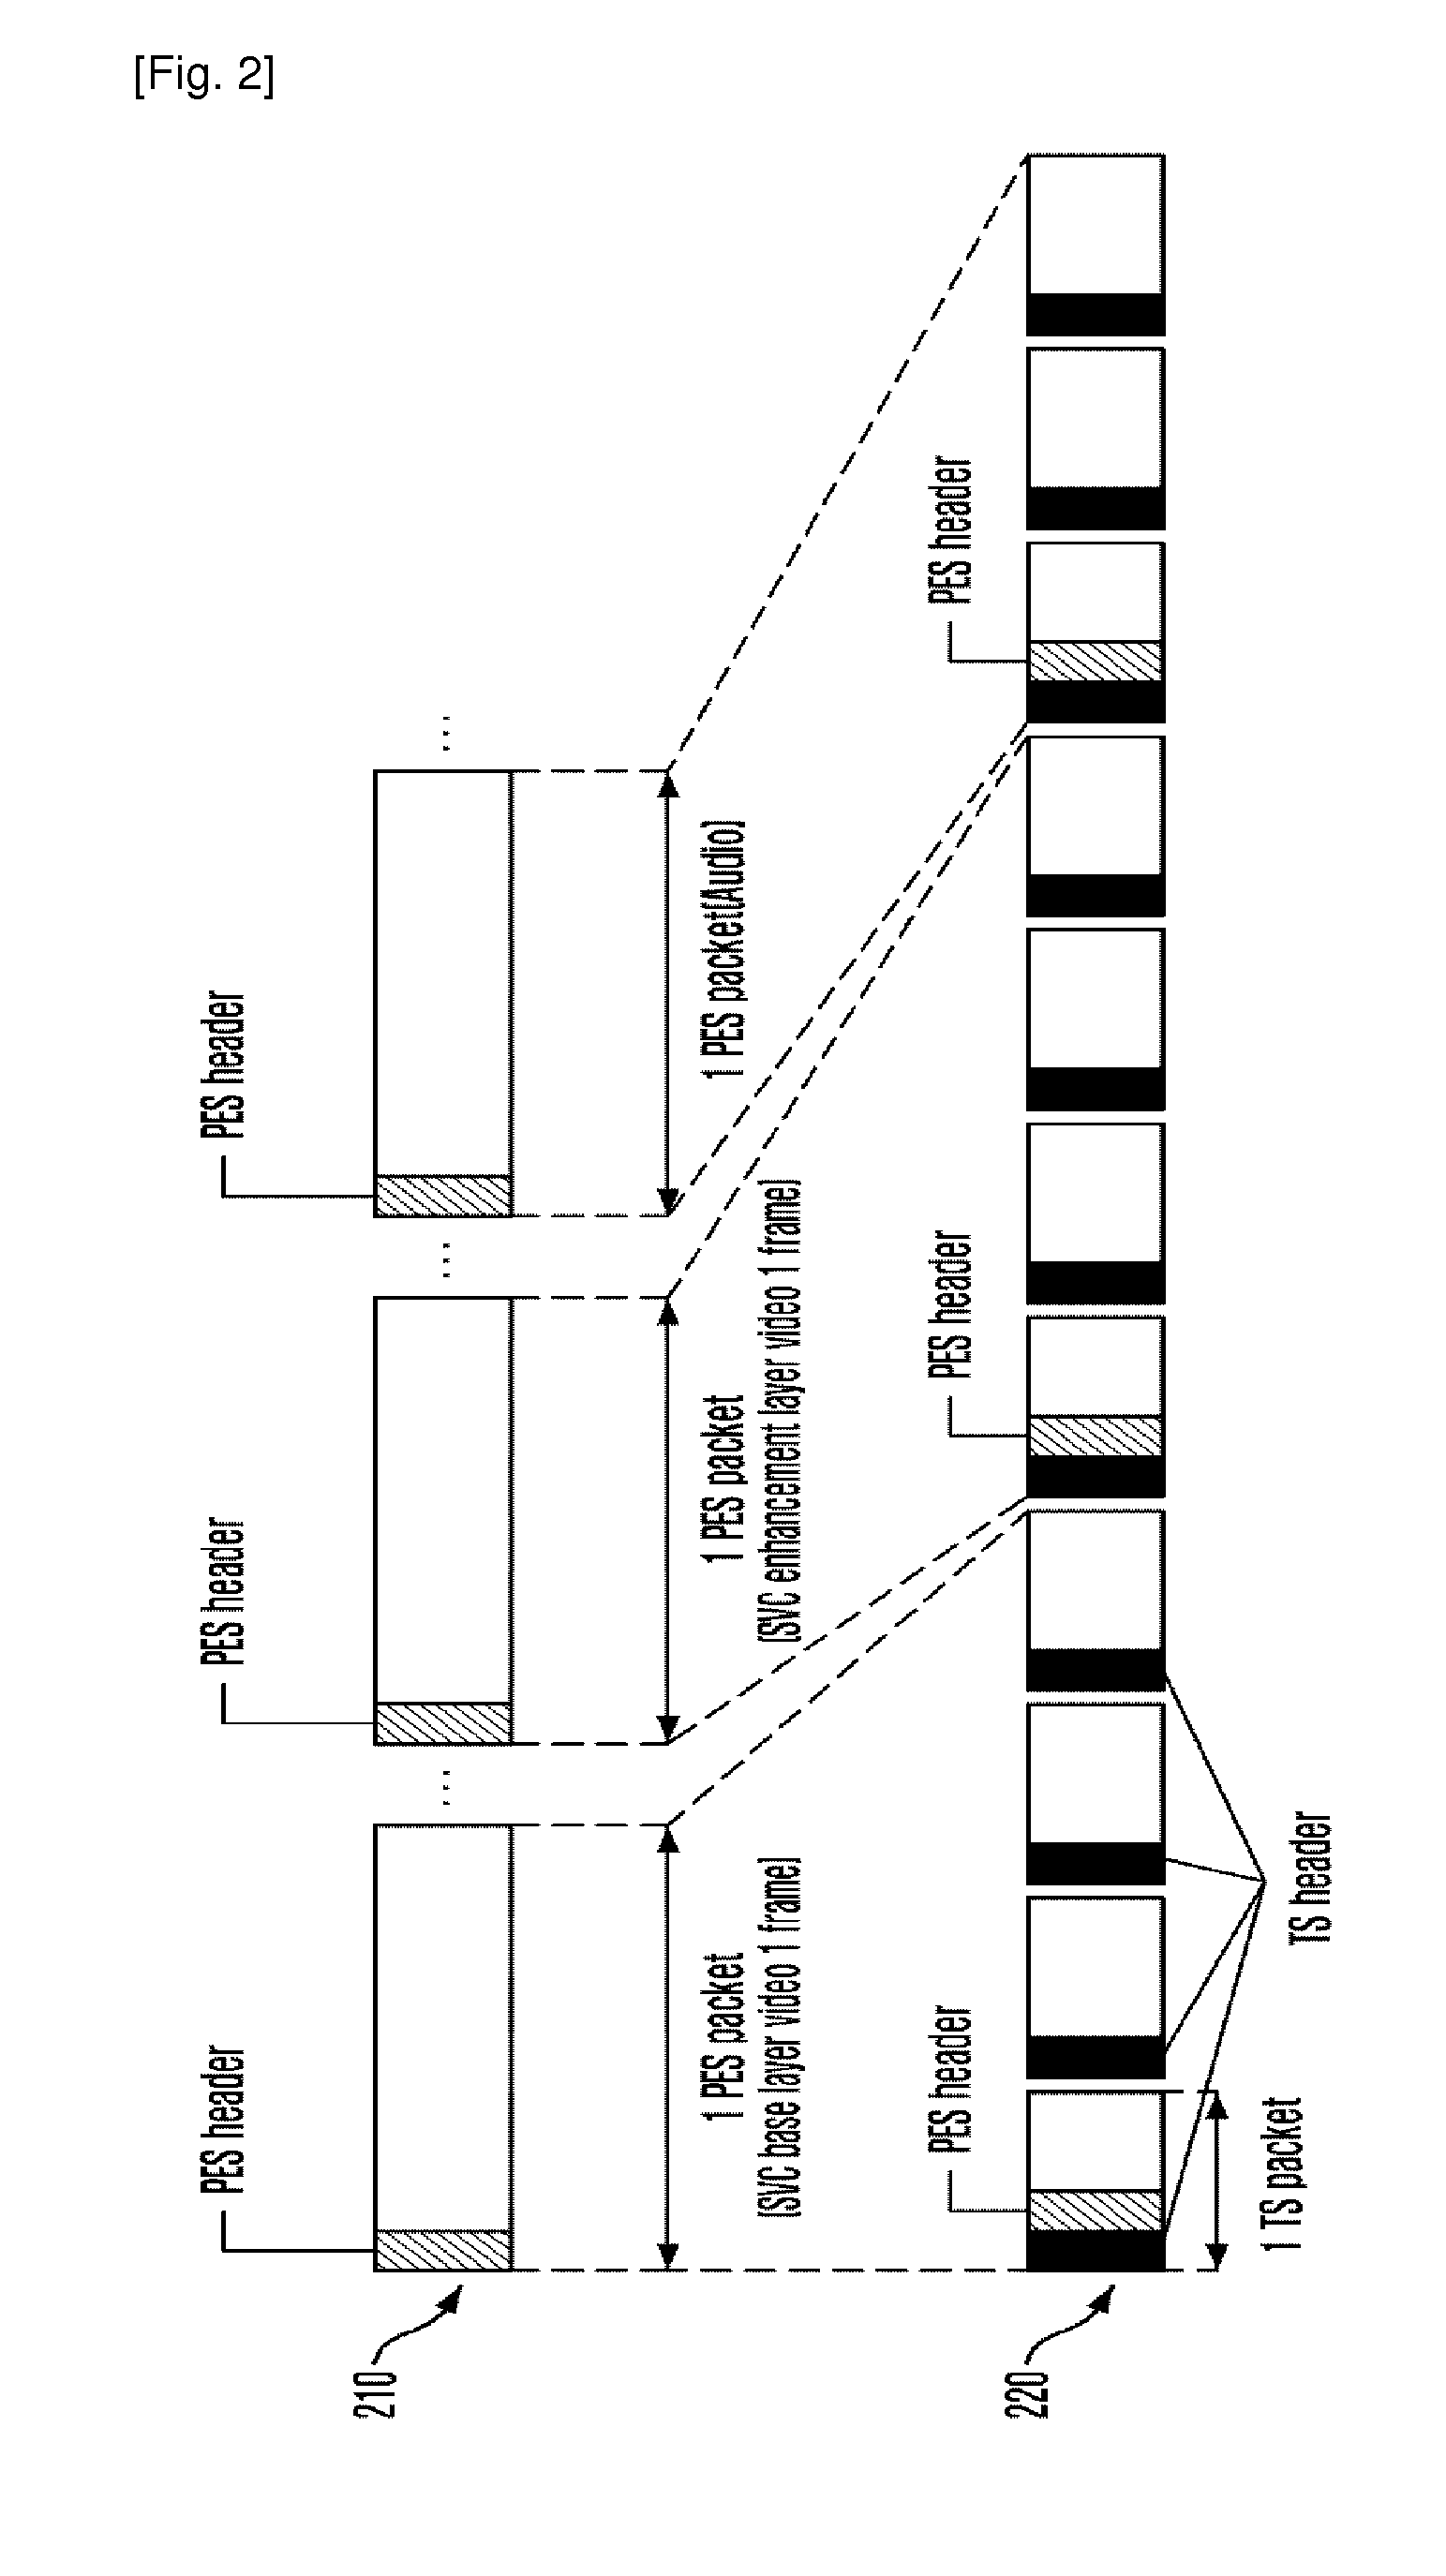 Scalable video broadcasting apparatus and method over multiband satellite channel